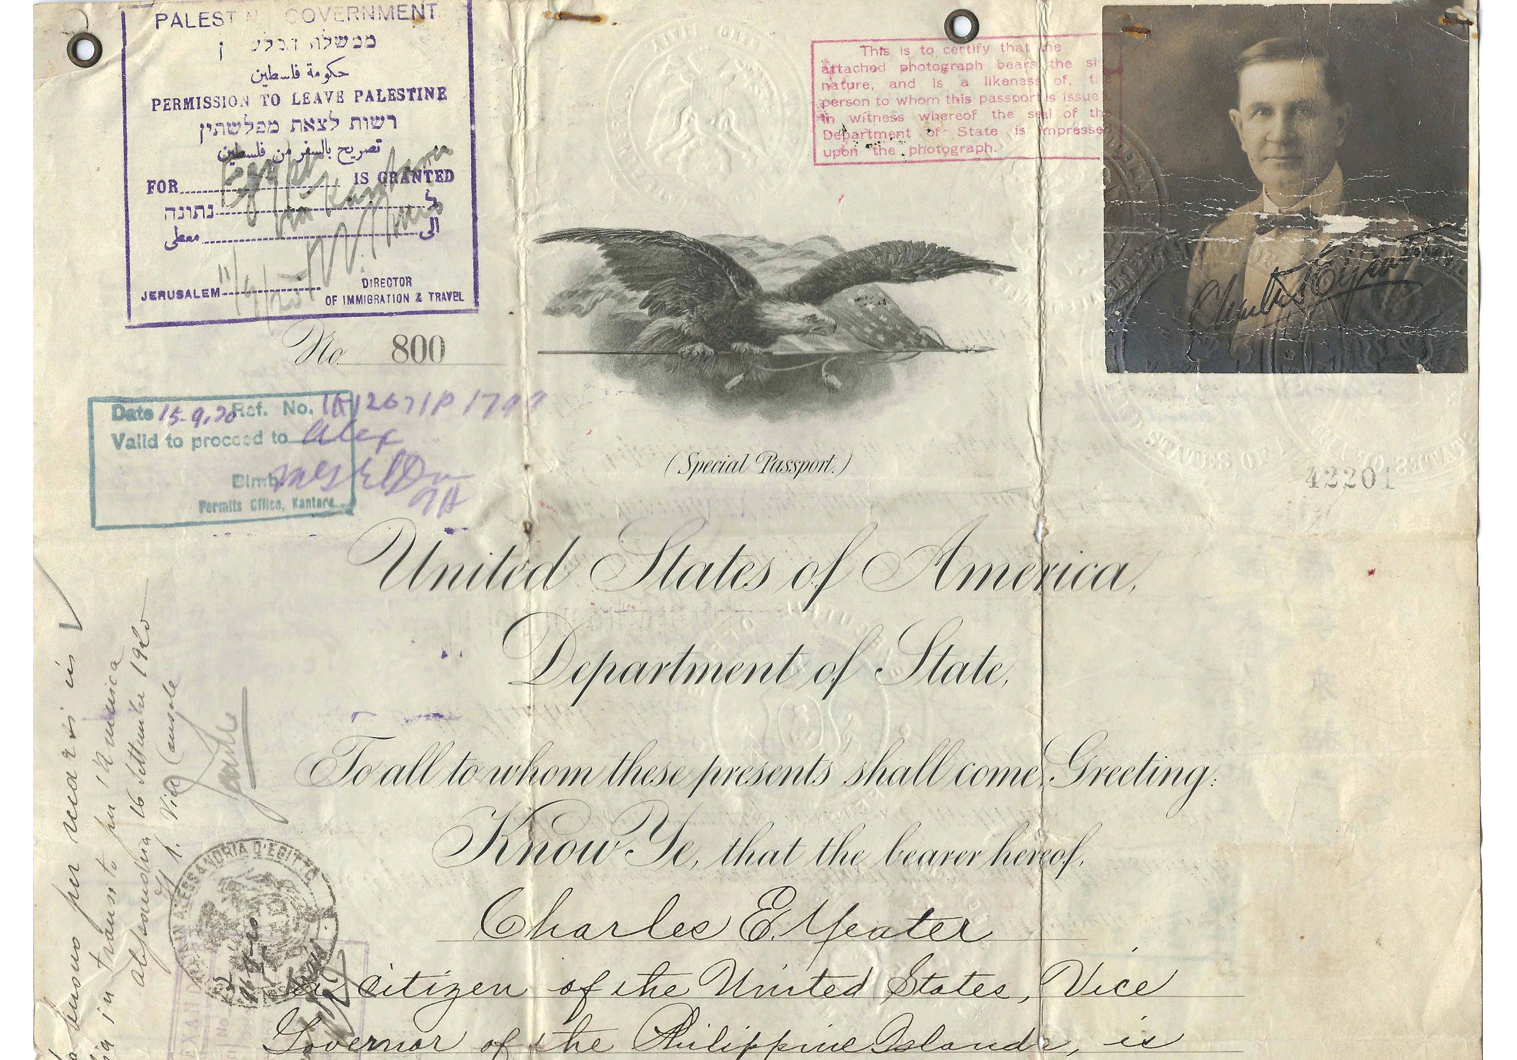 WWI United States Special passport